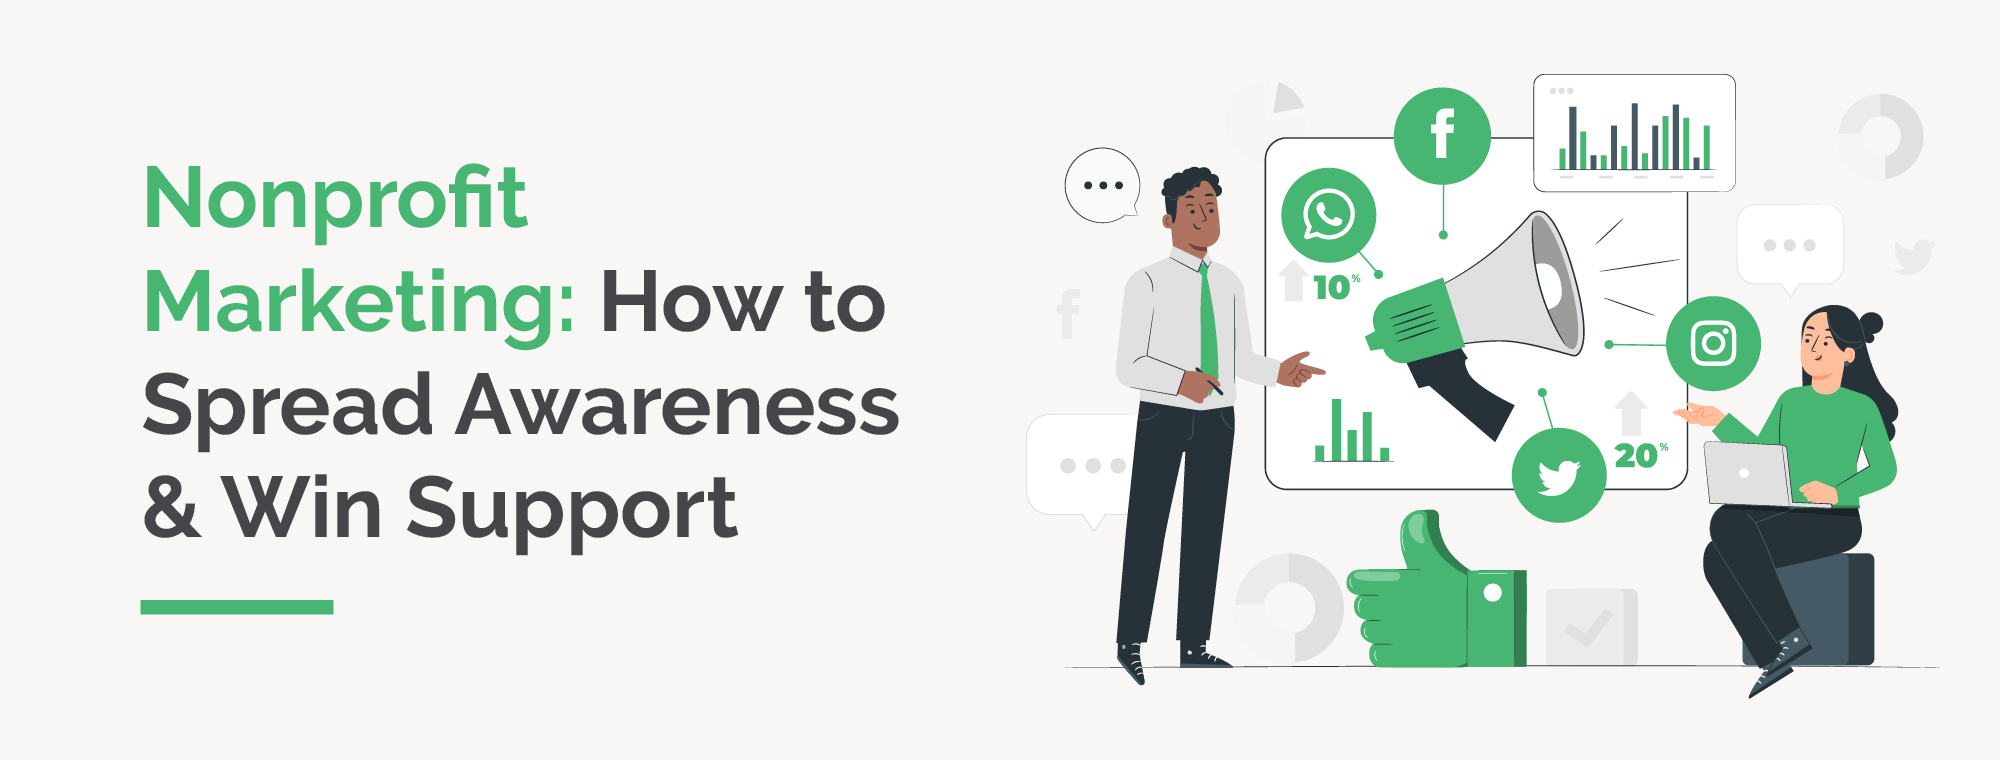 Nonprofit Marketing: How to Spread Awareness & Win Support